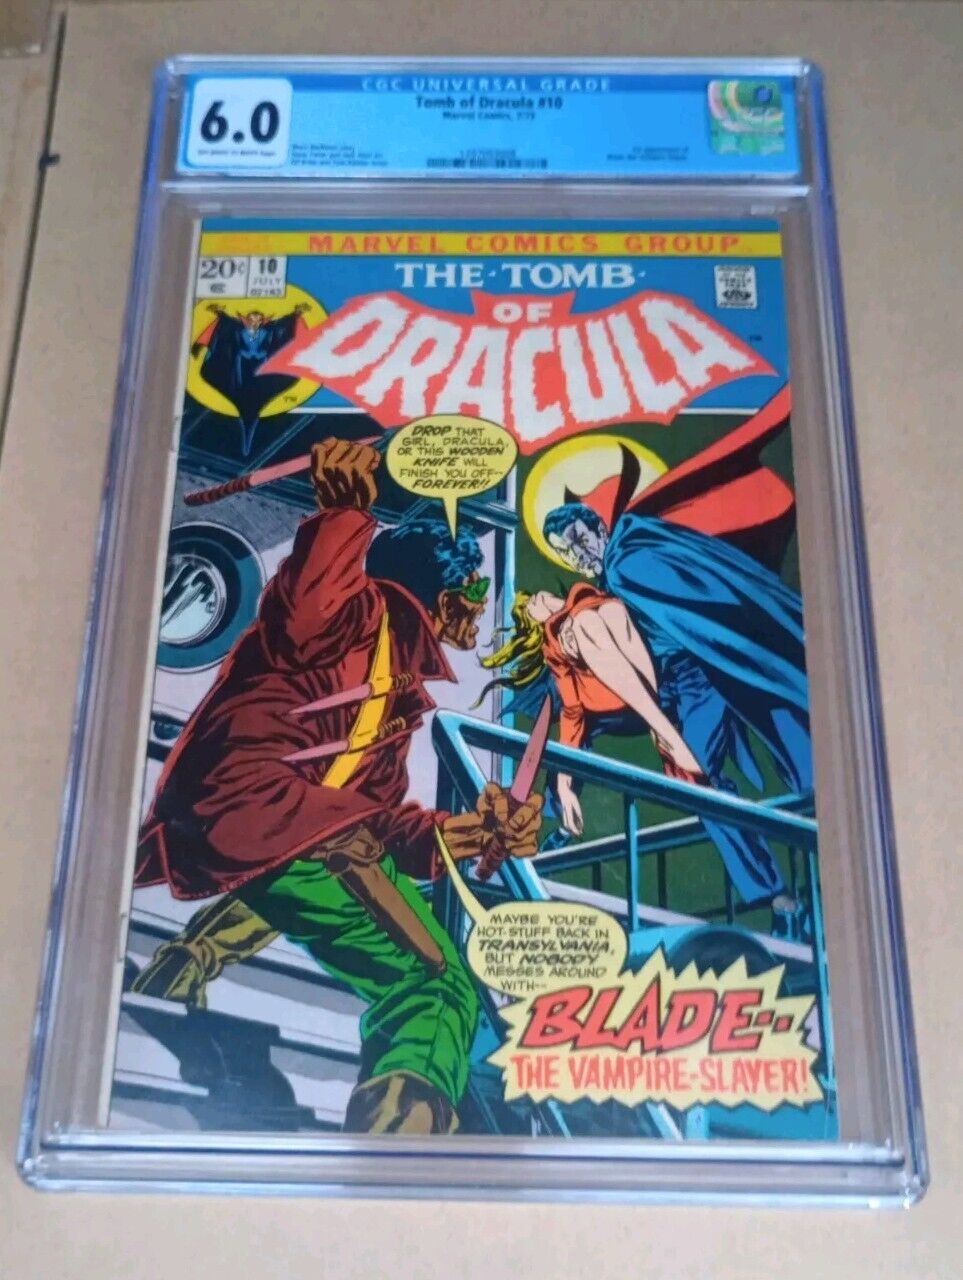 1973 Marvel Comics The Tomb of Dracula #10 CGC - 1st Appearance of Blade 